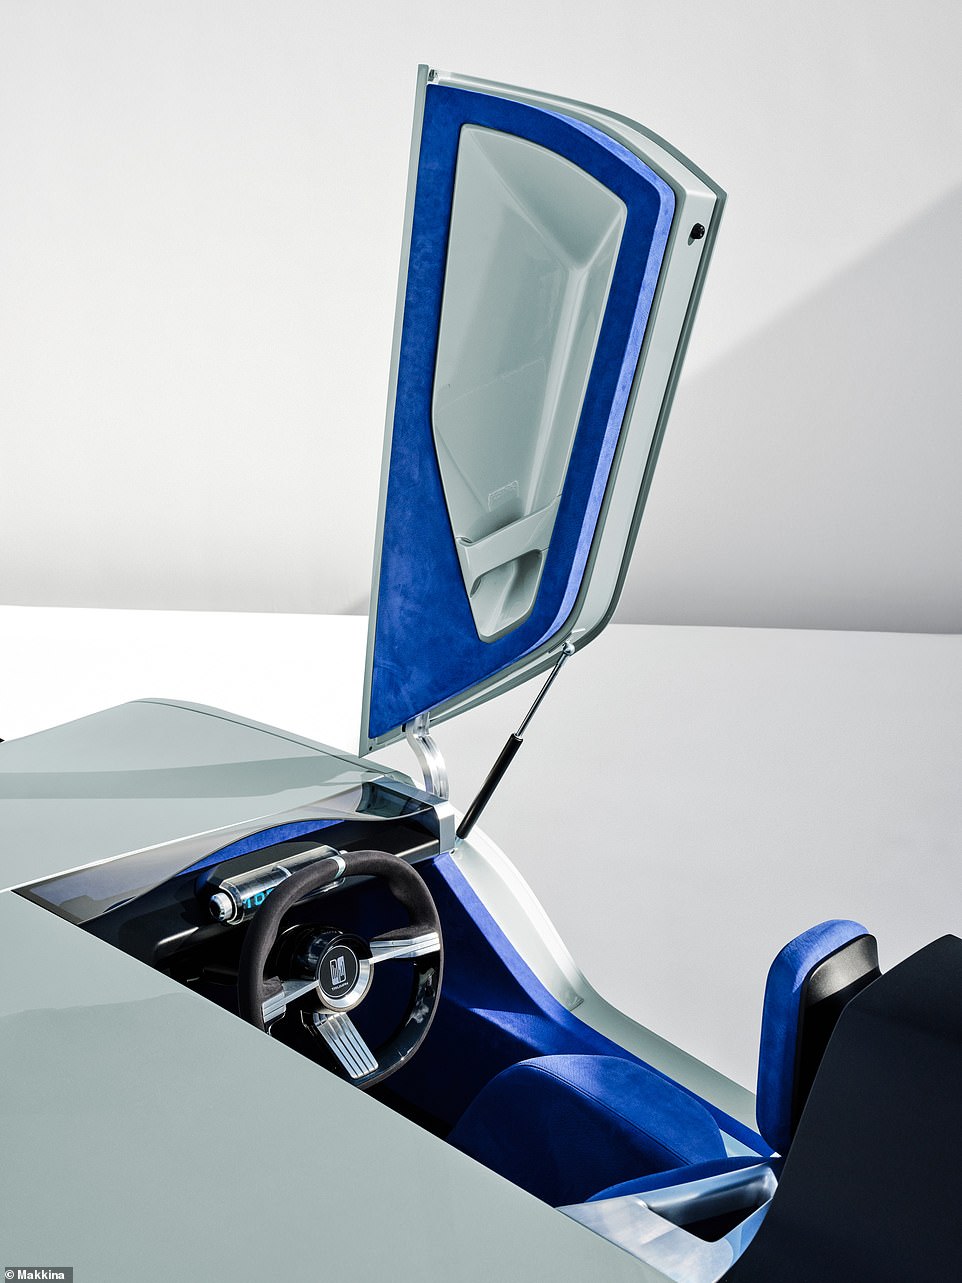 Inside, the cabin is as minimalist as the exterior body. Makkina says the cockpit 'aims to place the driver in a setting where there are no unnecessary distractions' to 'allow for the enjoyment of a pure driving experience'